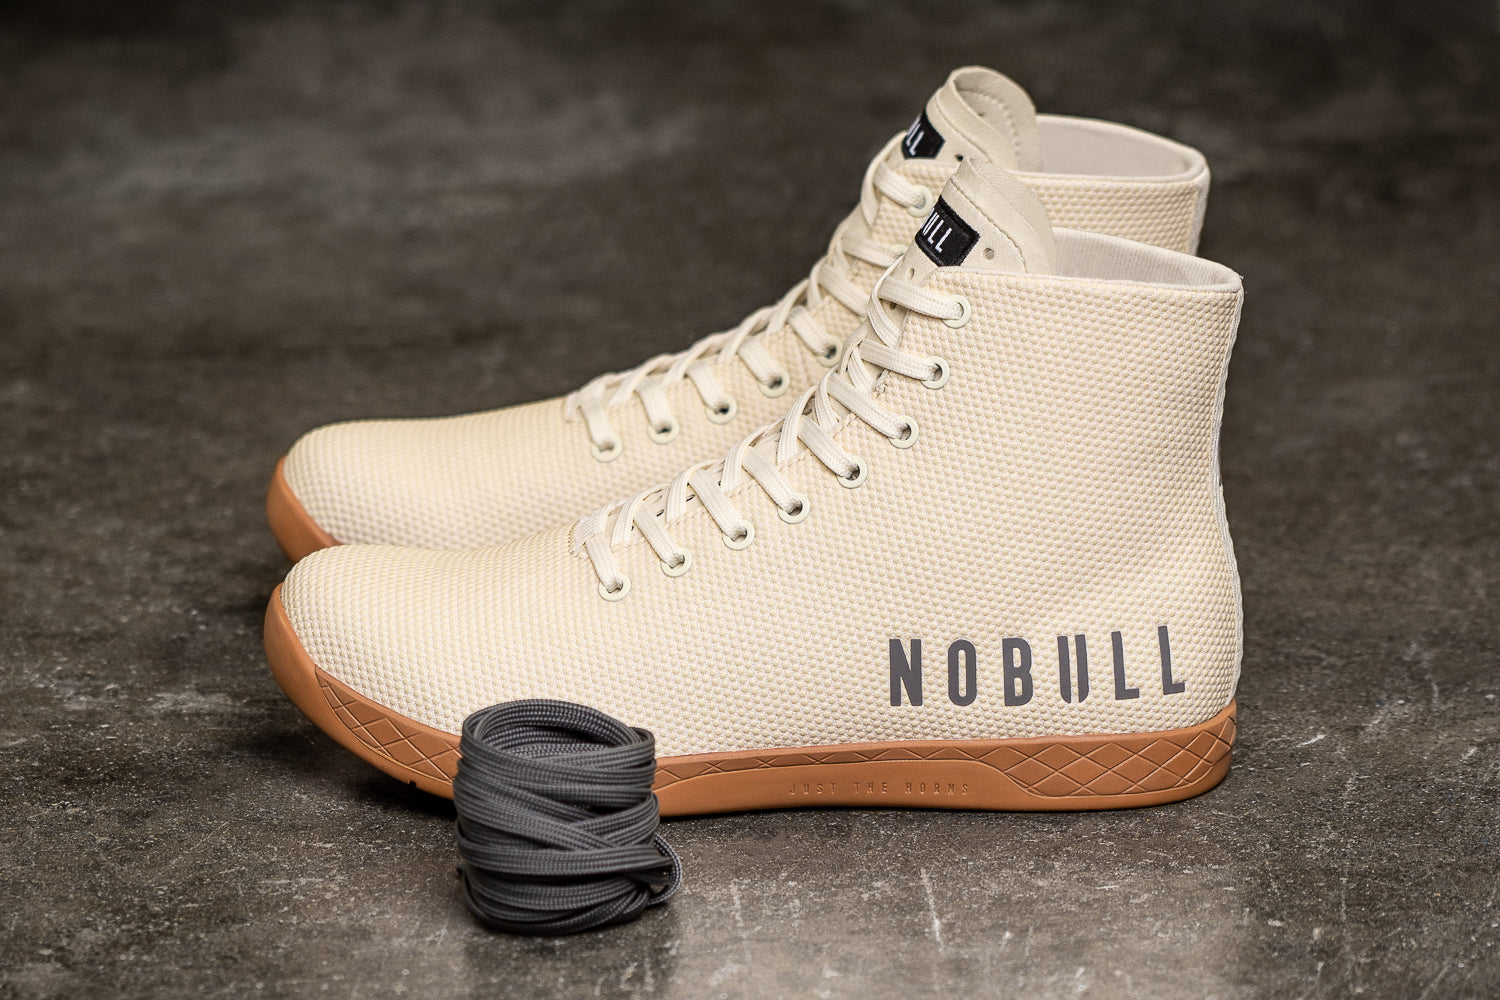 nobull weightlifting shoes